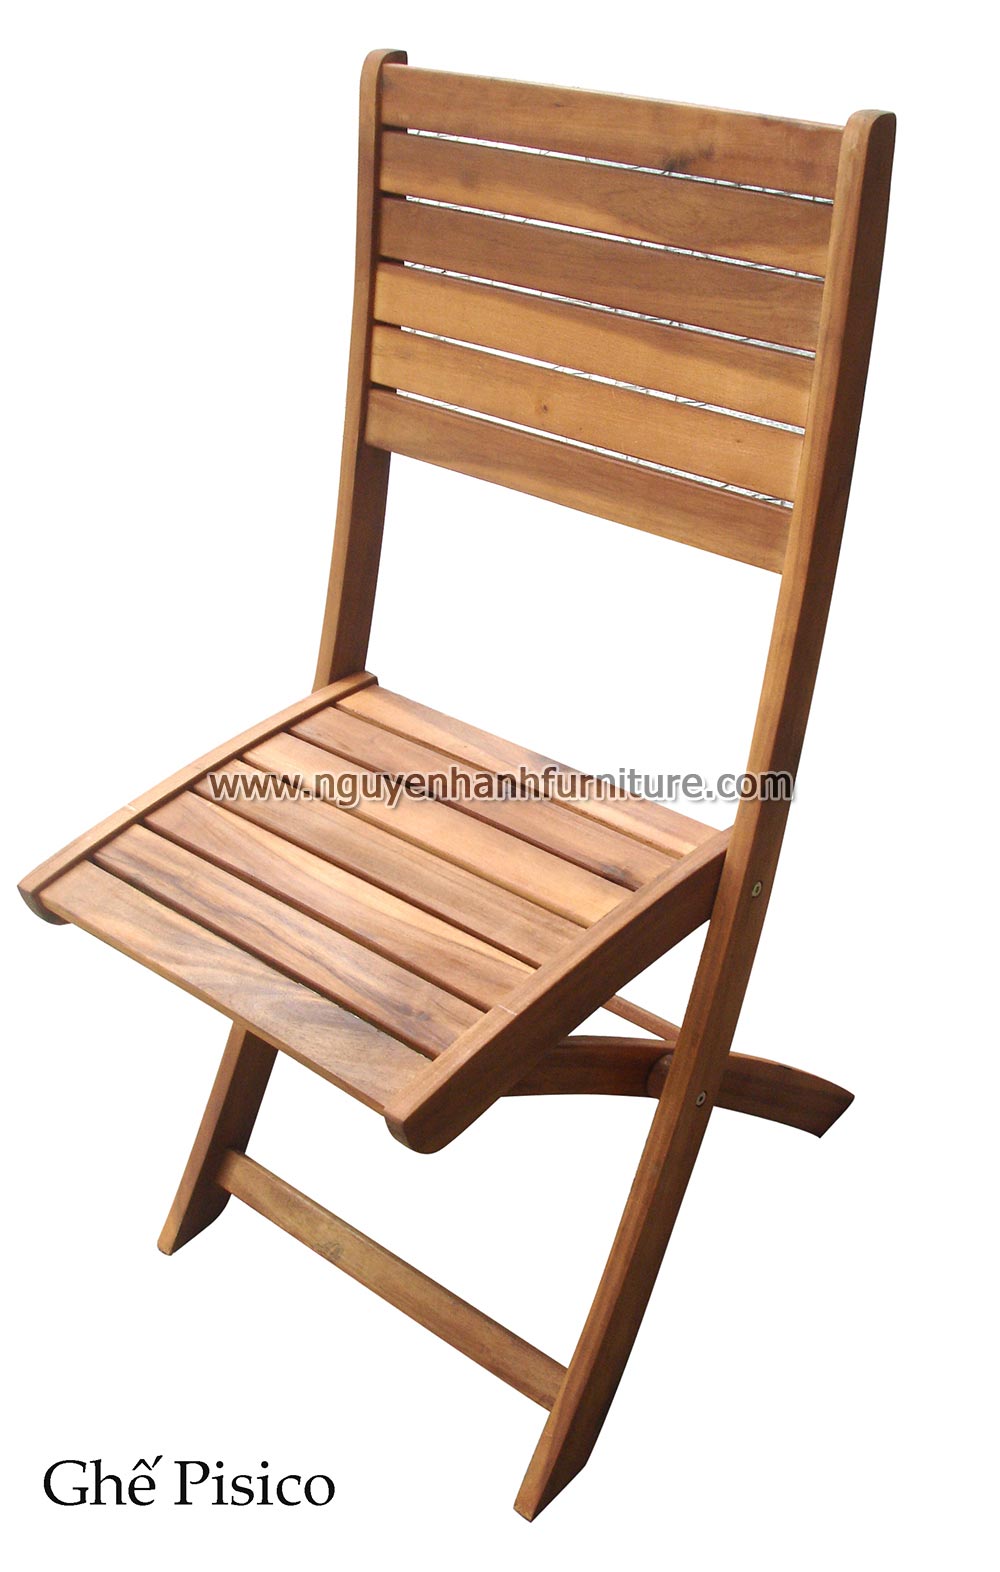 Name product: Pisico chair 